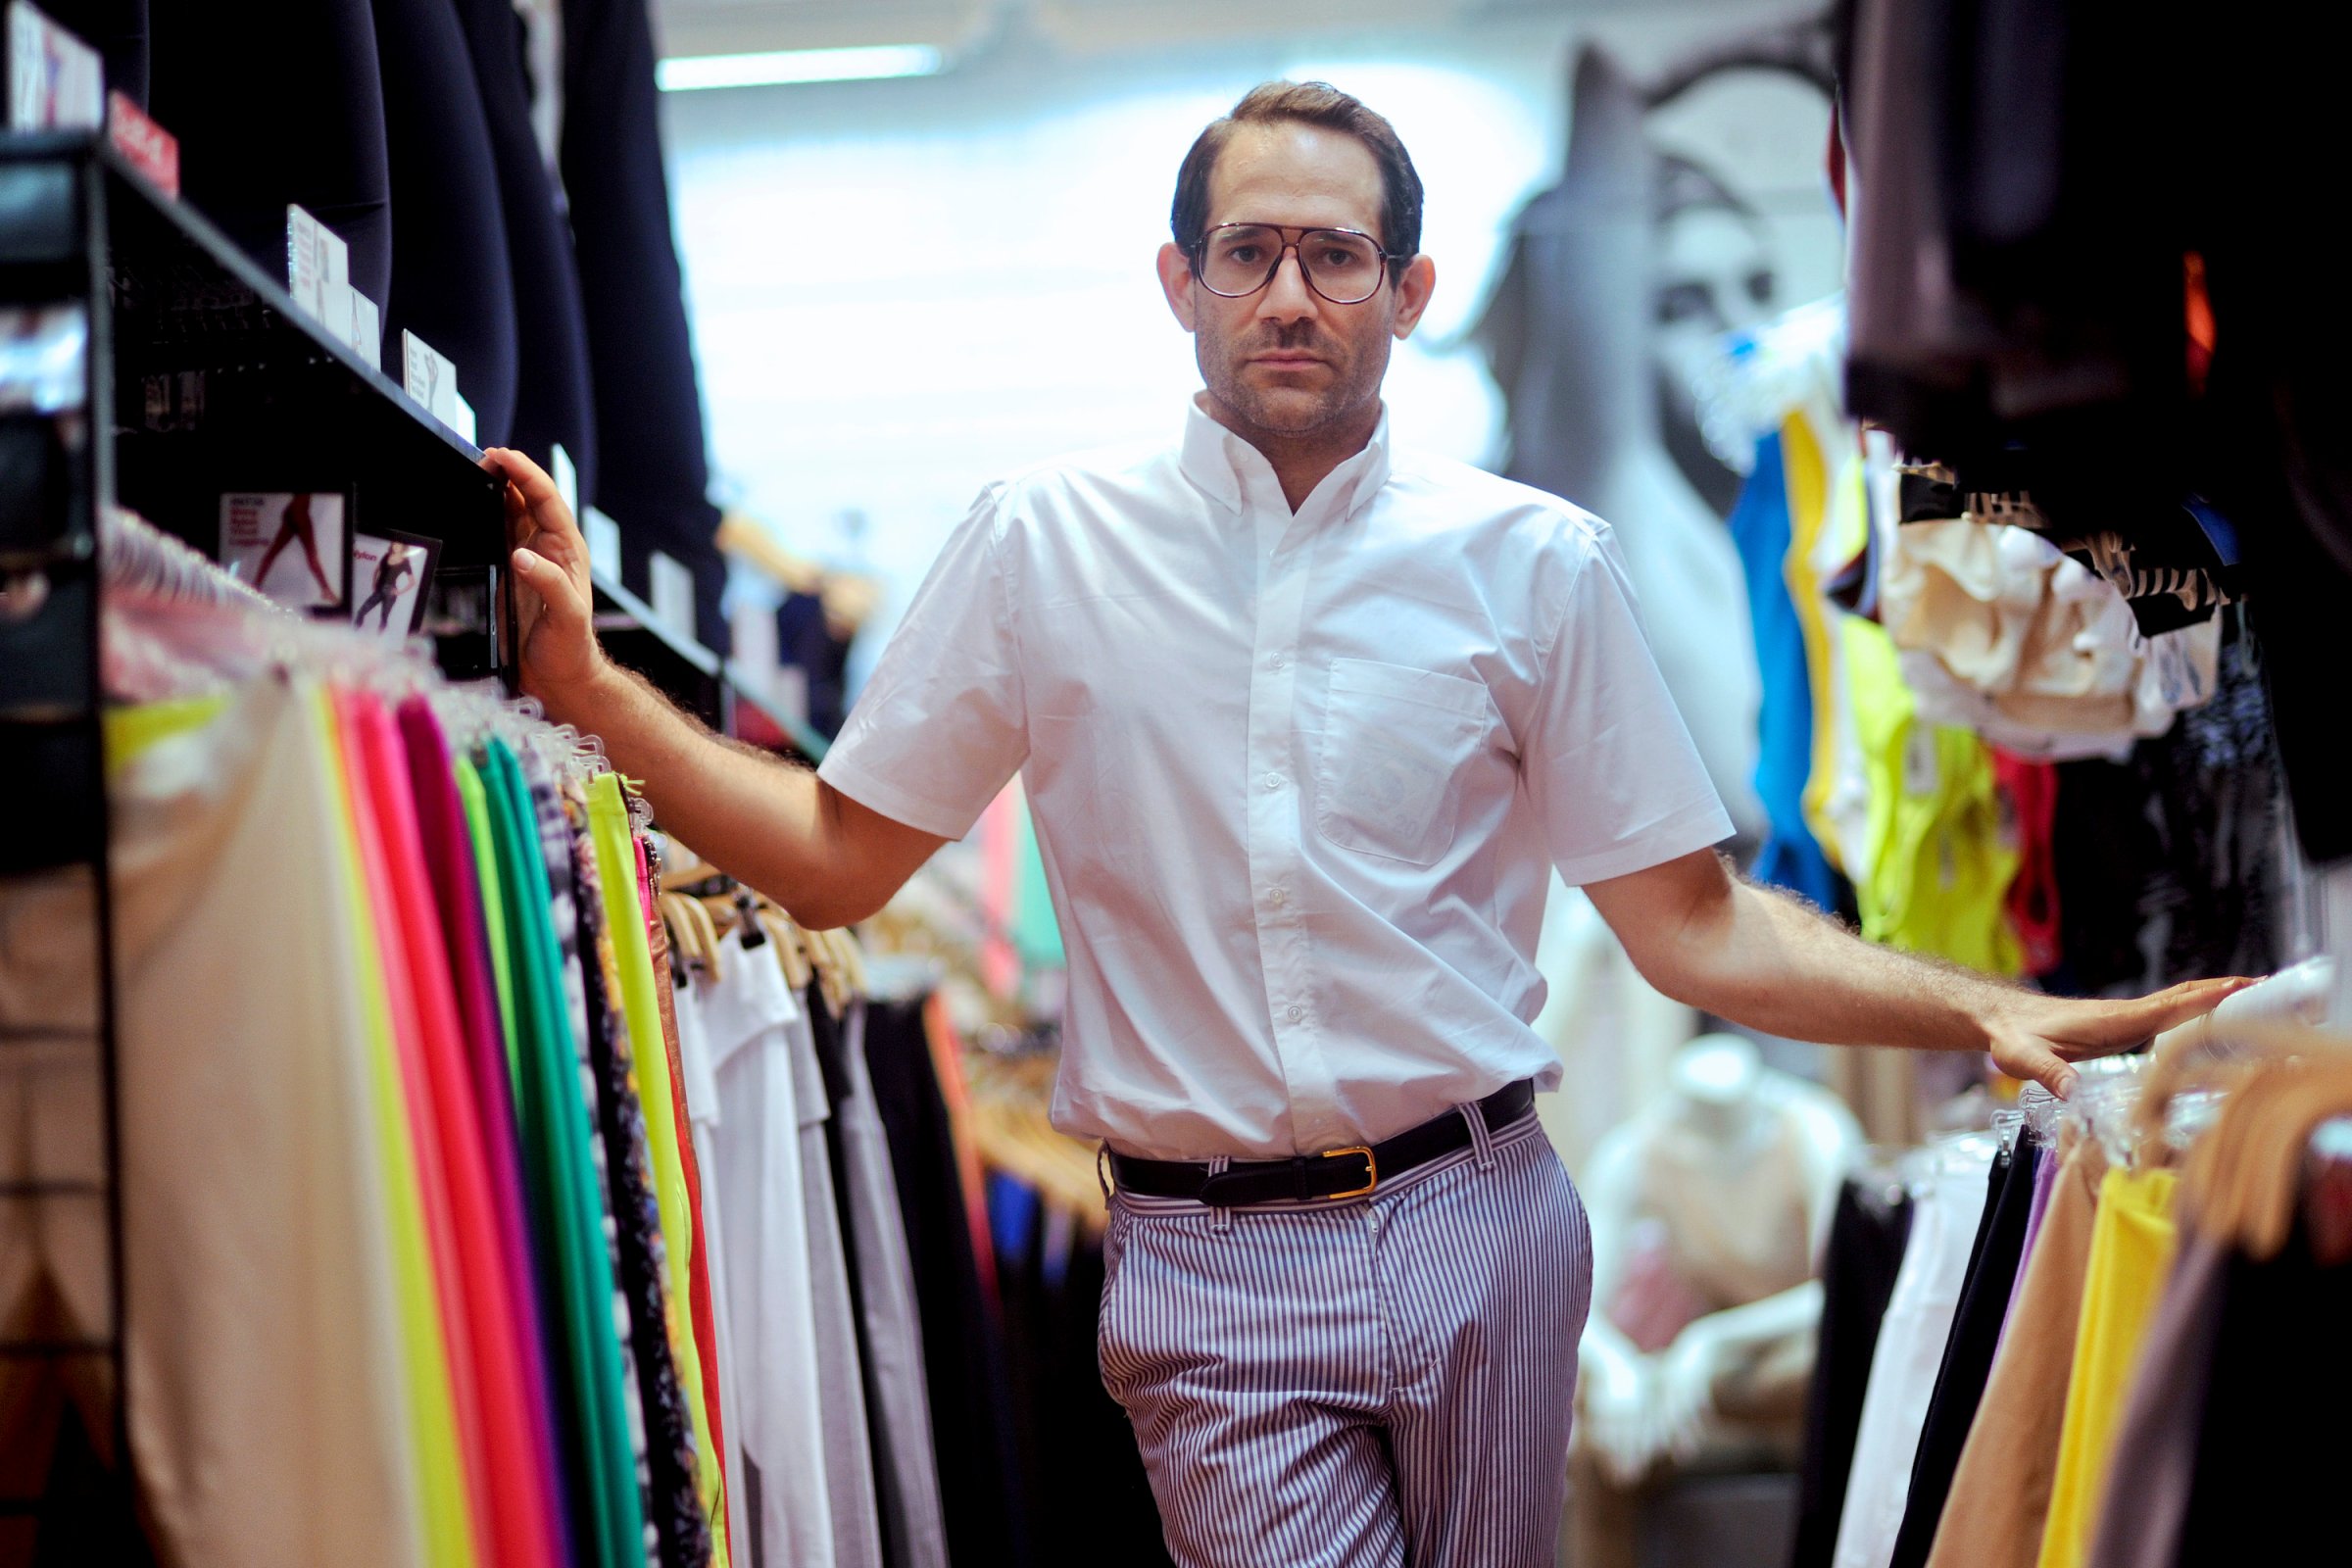 Dov Charney, former CEO of American Apparel.